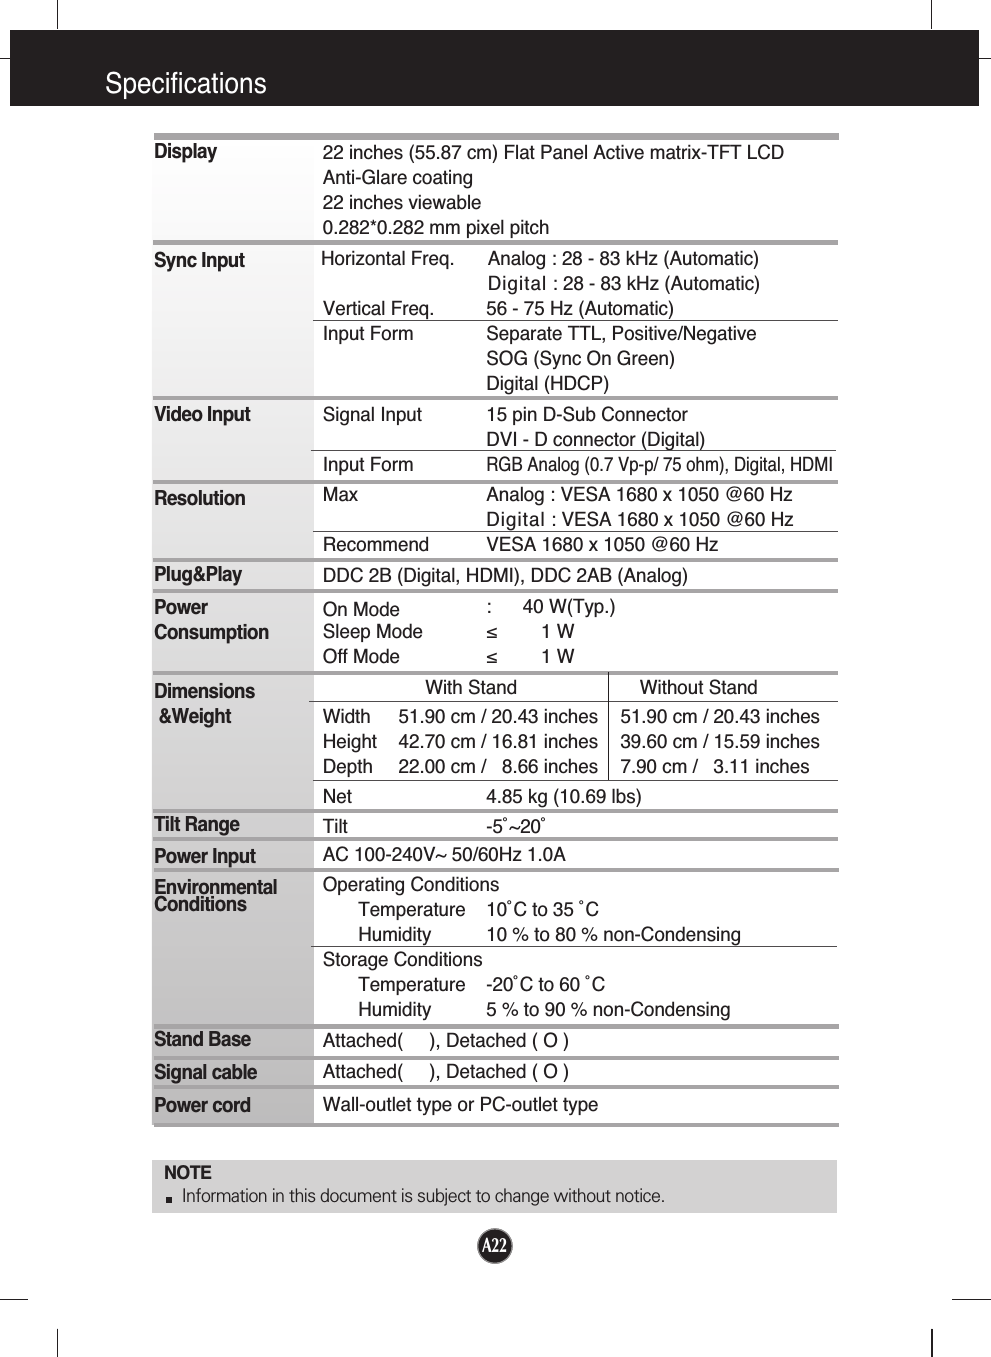 A22A22A22Specifications NOTEInformation in this document is subject to change without notice.DisplaySync InputVideo InputResolutionPlug&amp;PlayPowerConsumptionDimensions&amp;WeightTilt RangePower InputEnvironmentalConditionsStand BaseSignal cablePower cord 22 inches (55.87 cm) Flat Panel Active matrix-TFT LCD Anti-Glare coating22 inches viewable0.282*0.282 mm pixel pitchHorizontal Freq. Analog : 28 - 83 kHz (Automatic)Digital : 28 - 83 kHz (Automatic)Vertical Freq. 56 - 75 Hz (Automatic)Input Form Separate TTL, Positive/NegativeSOG (Sync On Green) Digital (HDCP)Signal Input 15 pin D-Sub ConnectorDVI - D connector (Digital)Input FormRGB Analog (0.7 Vp-p/ 75 ohm), Digital, HDMIMax Analog : VESA 1680 x 1050 @60 HzDigital : VESA 1680 x 1050 @60 HzRecommend VESA 1680 x 1050 @60 HzDDC 2B (Digital, HDMI), DDC 2AB (Analog)On Mode : 40 W(Typ.)Sleep Mode ≤ 1 WOff Mode ≤ 1 WWith Stand Without StandWidth 51.90 cm / 20.43 inches 51.90 cm / 20.43 inchesHeight 42.70 cm / 16.81 inches 39.60 cm / 15.59 inchesDepth 22.00 cm /   8.66 inches 7.90 cm /   3.11 inchesNet 4.85 kg (10.69 lbs)Tilt -5˚~20˚AC 100-240V~ 50/60Hz 1.0A Operating ConditionsTemperature 10˚C to 35 ˚CHumidity 10 % to 80 % non-CondensingStorage ConditionsTemperature -20˚C to 60 ˚CHumidity 5 % to 90 % non-CondensingAttached(     ), Detached ( O )Attached(     ), Detached ( O )Wall-outlet type or PC-outlet type